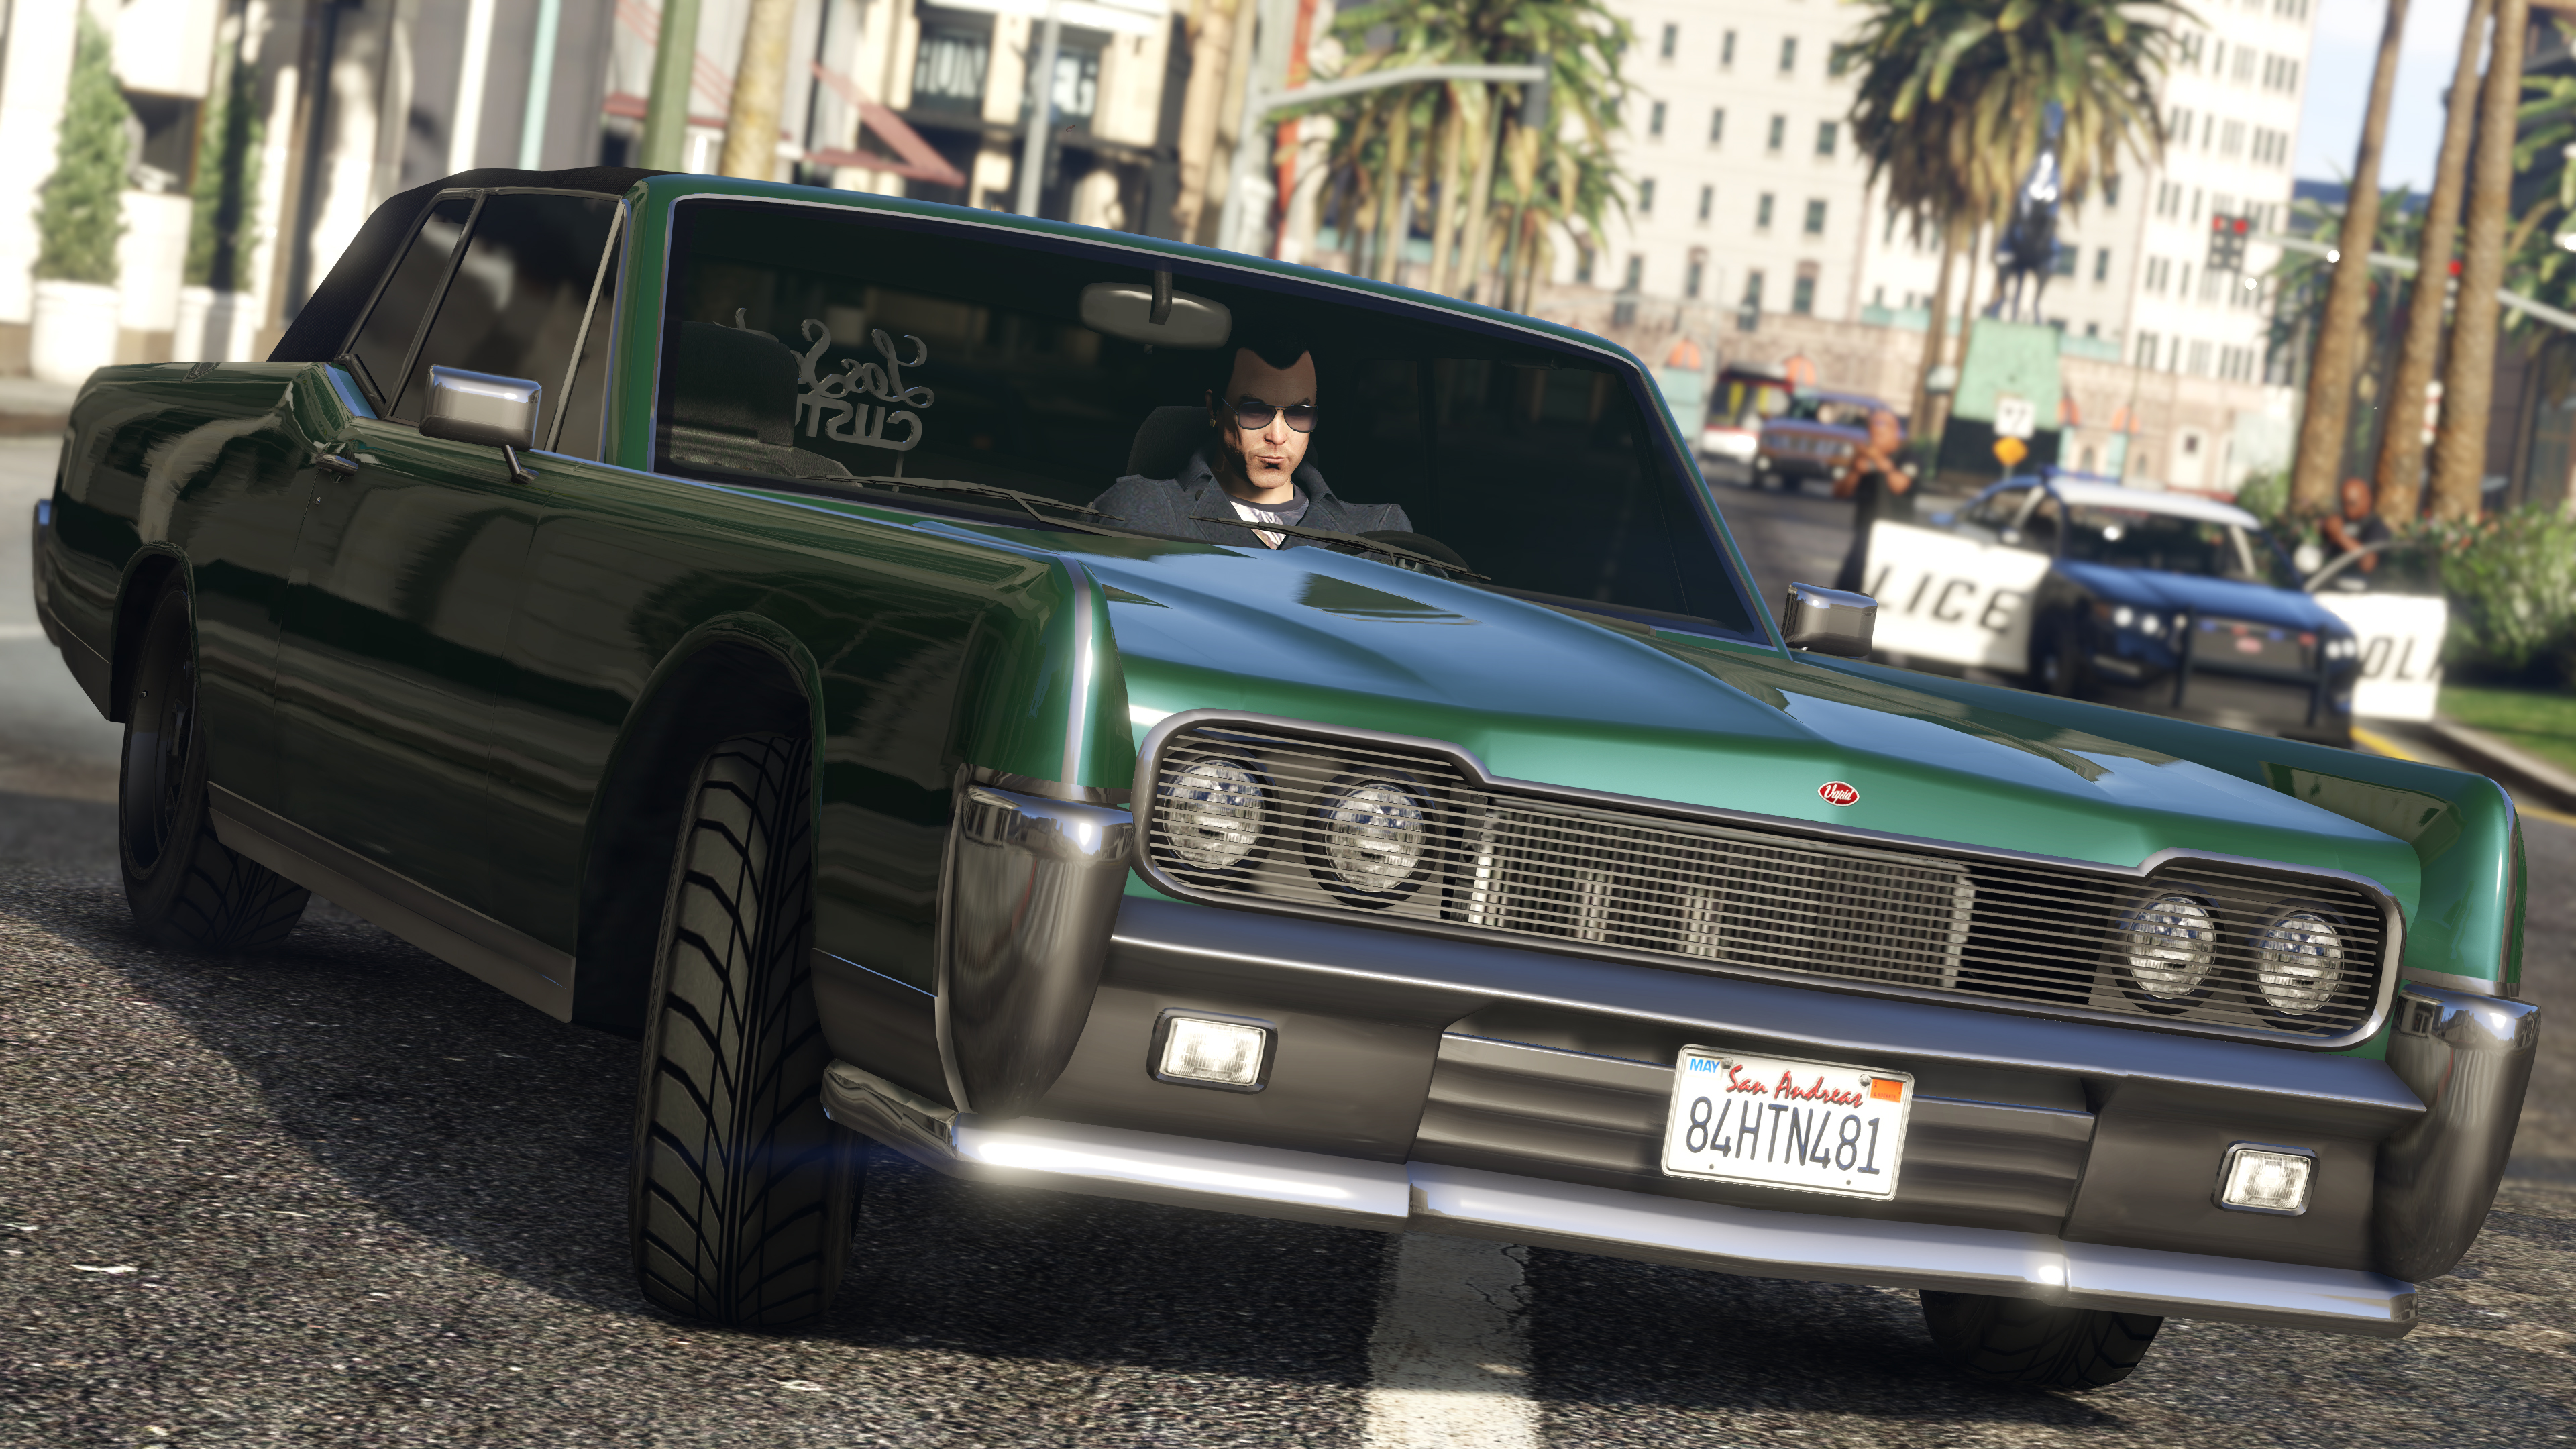 grand theft auto News, Rumors and Information - Bleeding Cool News And  Rumors Page 2